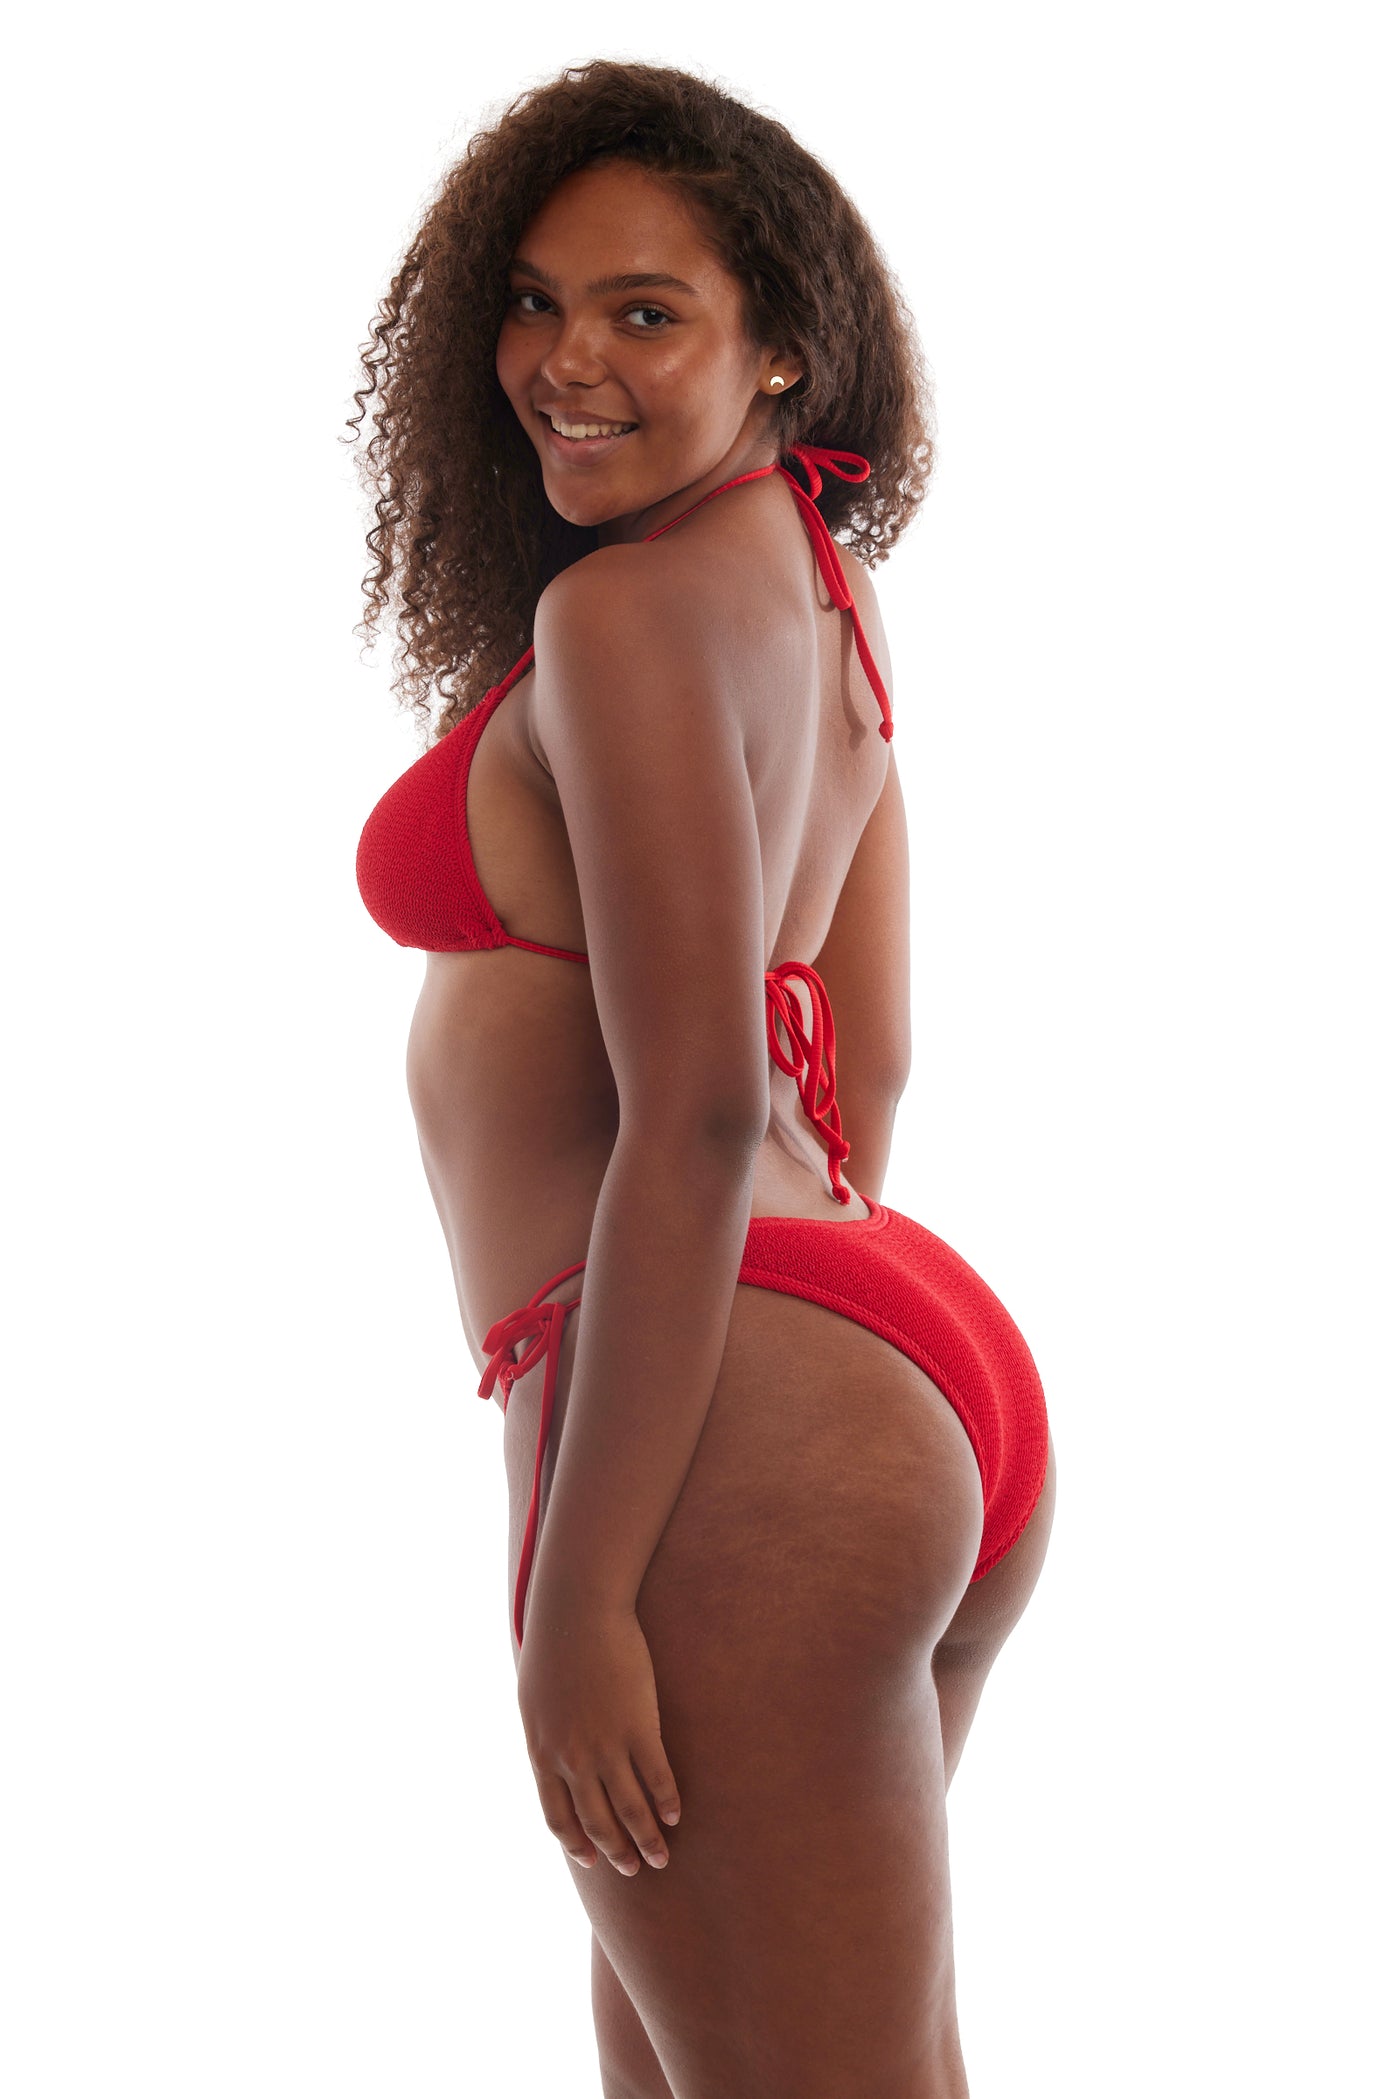 Jamaica Adjustable Strings One Size Bikini BOTTOM ONLY (Red)